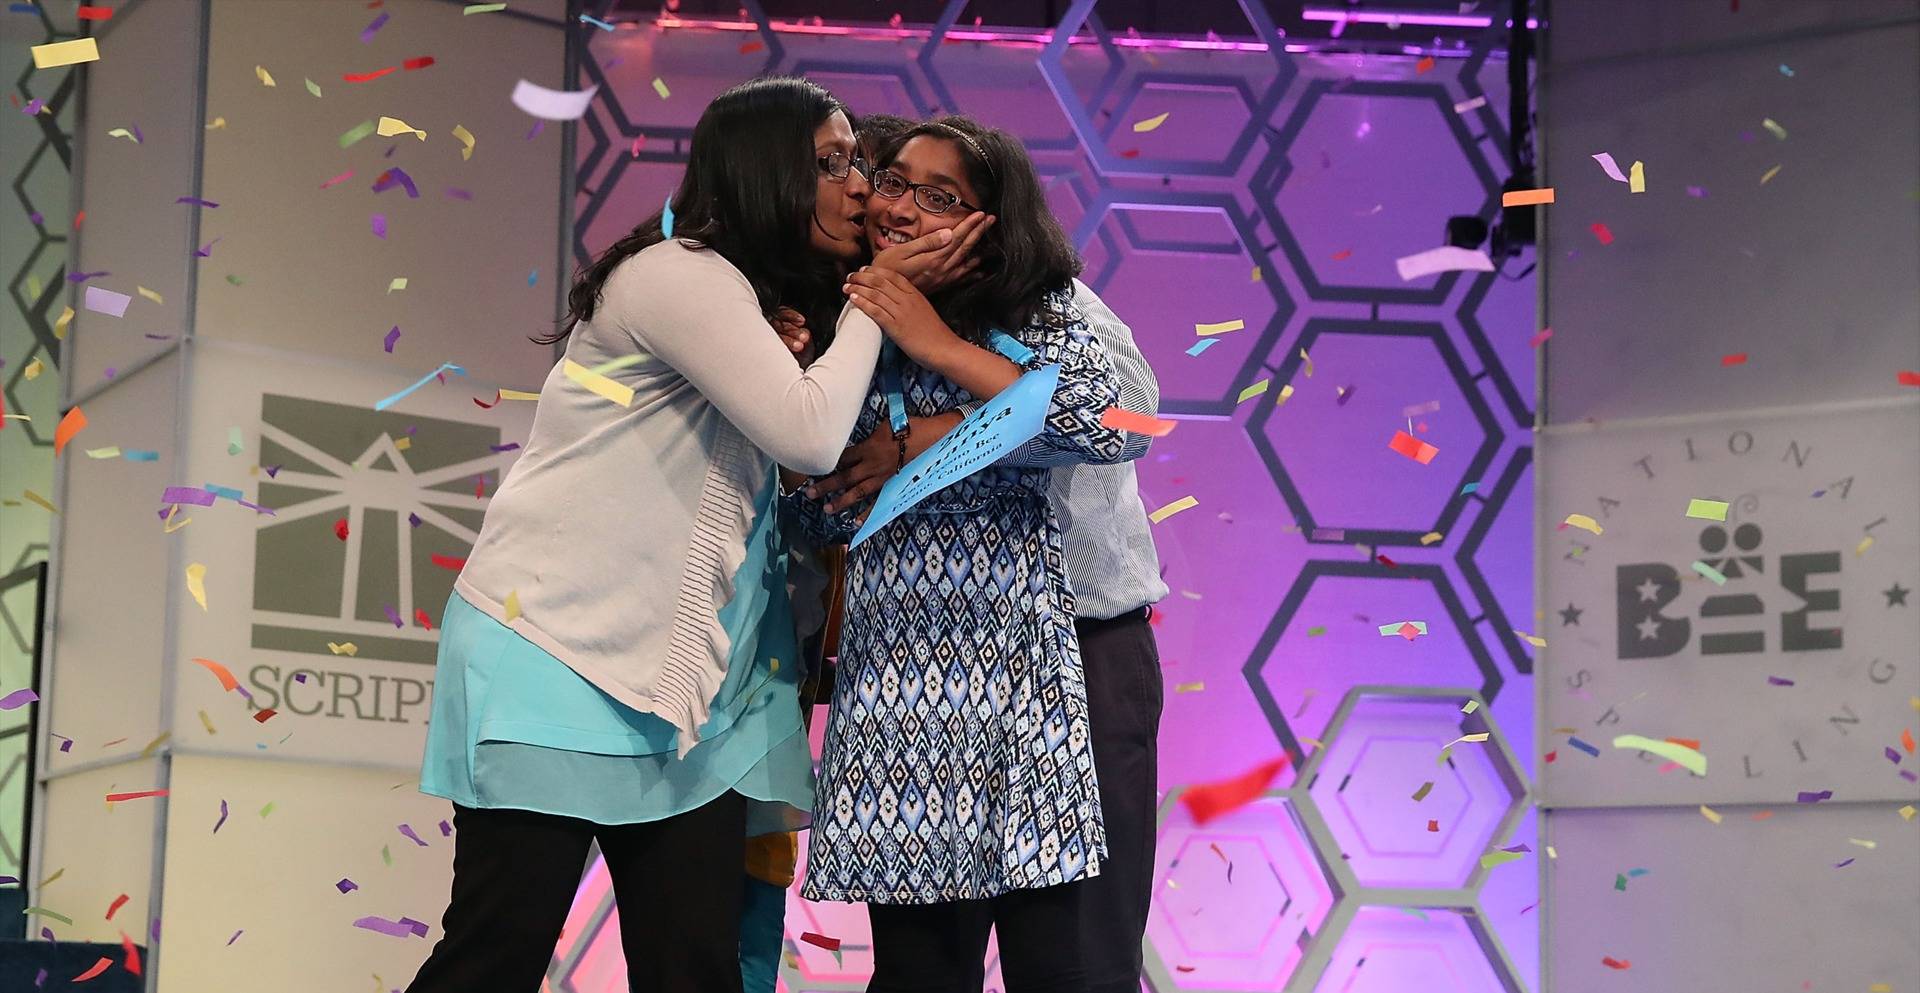 Ananya Vinay, 12, of Fresno, California, gets a kiss from her mom, Anu Pama Poliyedathpp, after winning the 2017 Scripps National Spelling Bee on June 1, 2017, in Oxon Hill, Maryland.  Mark Wilson/Getty Images